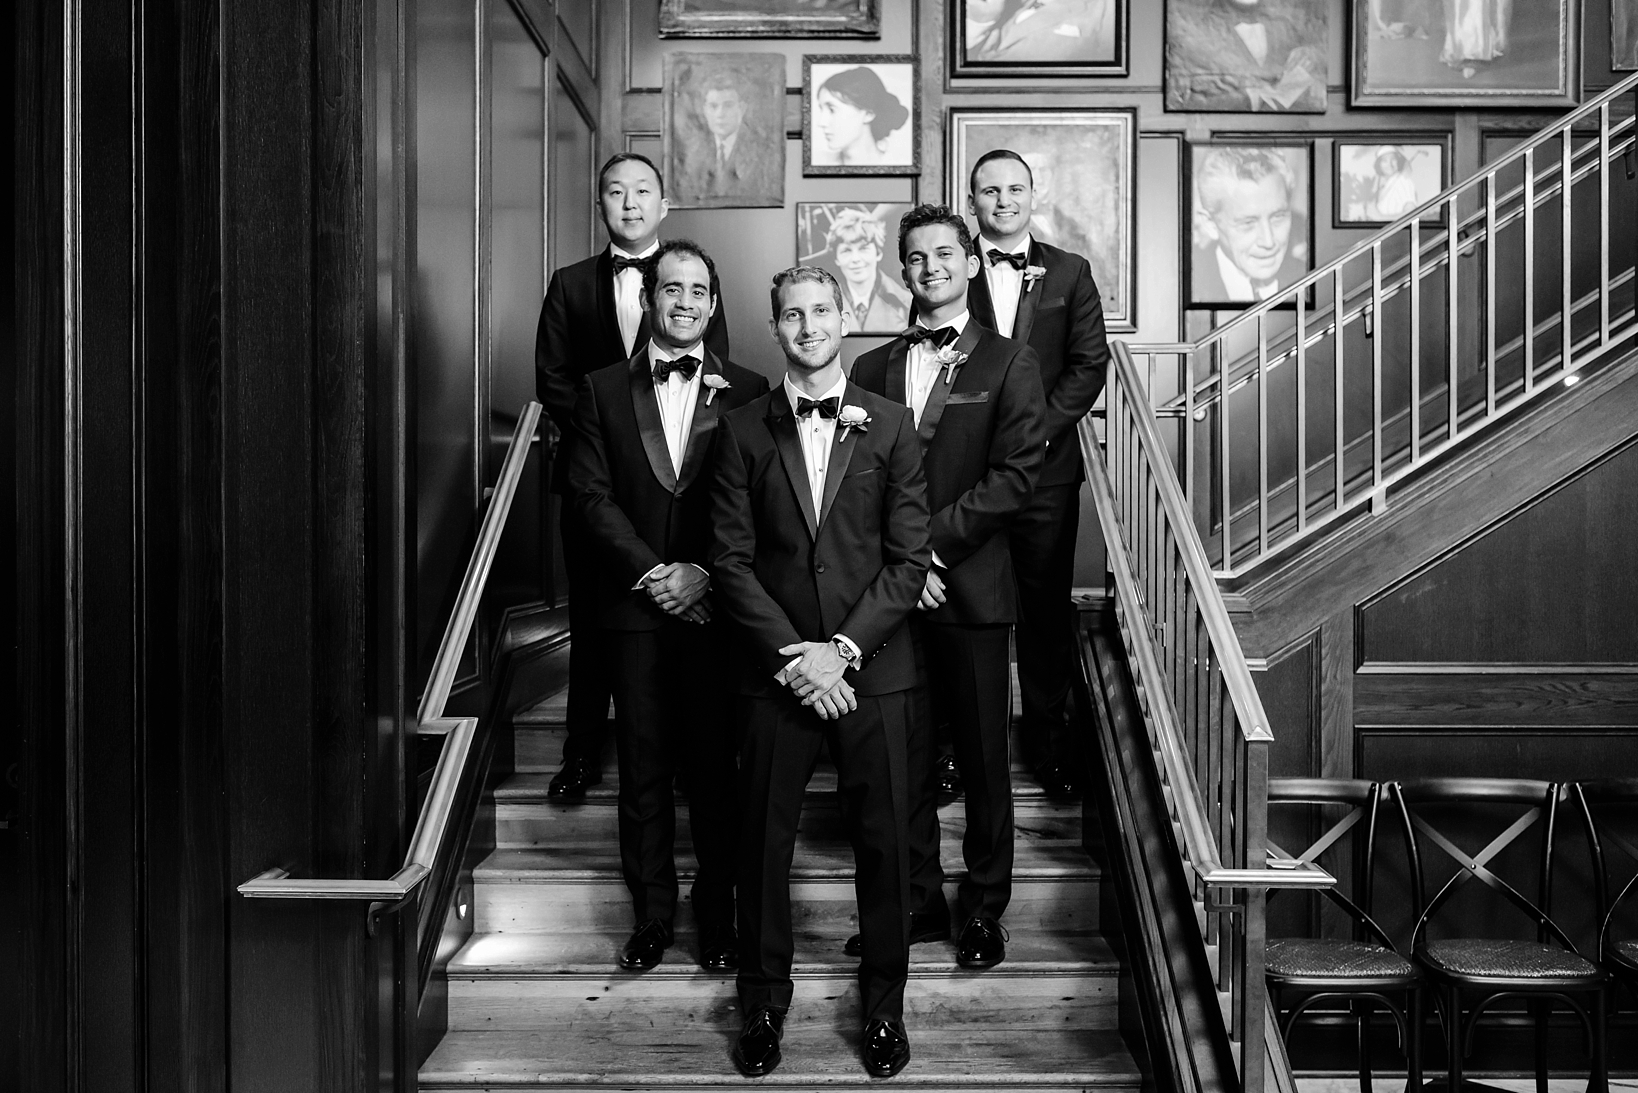 Groom and his Groomsmen in Black and White on the steps of the wedding venue